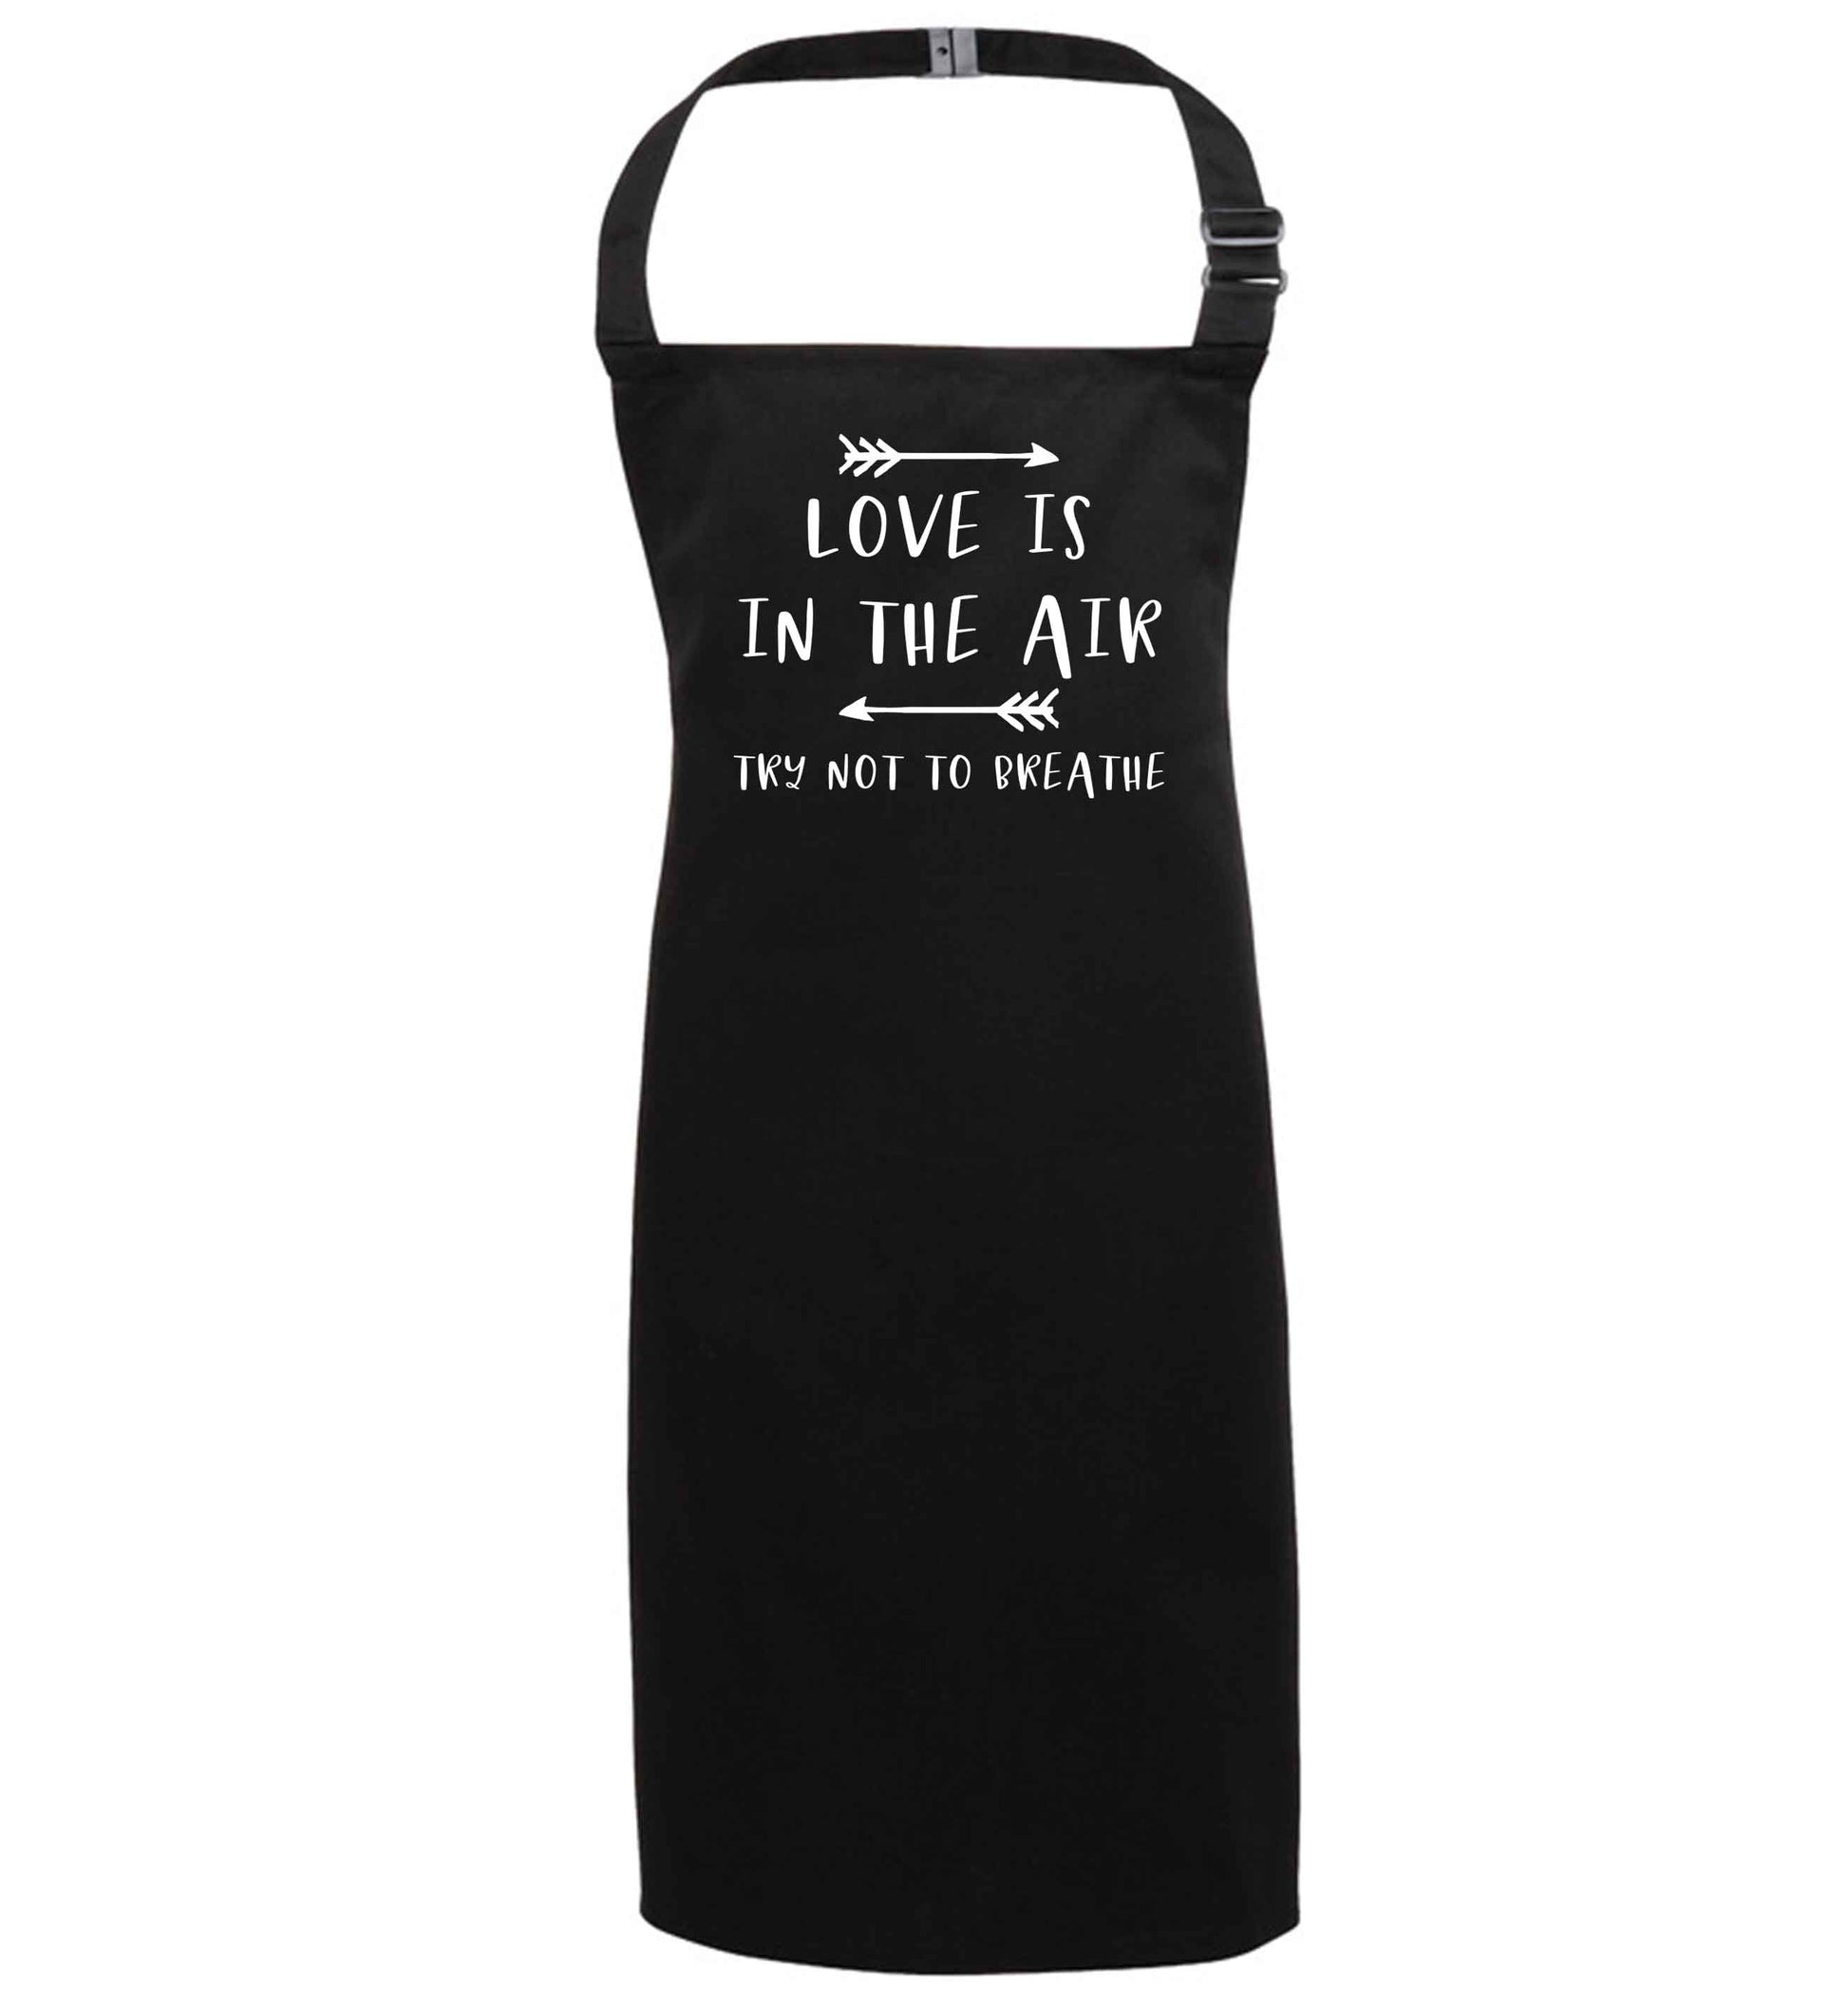 Love is in the air try not to breathe black apron 7-10 years